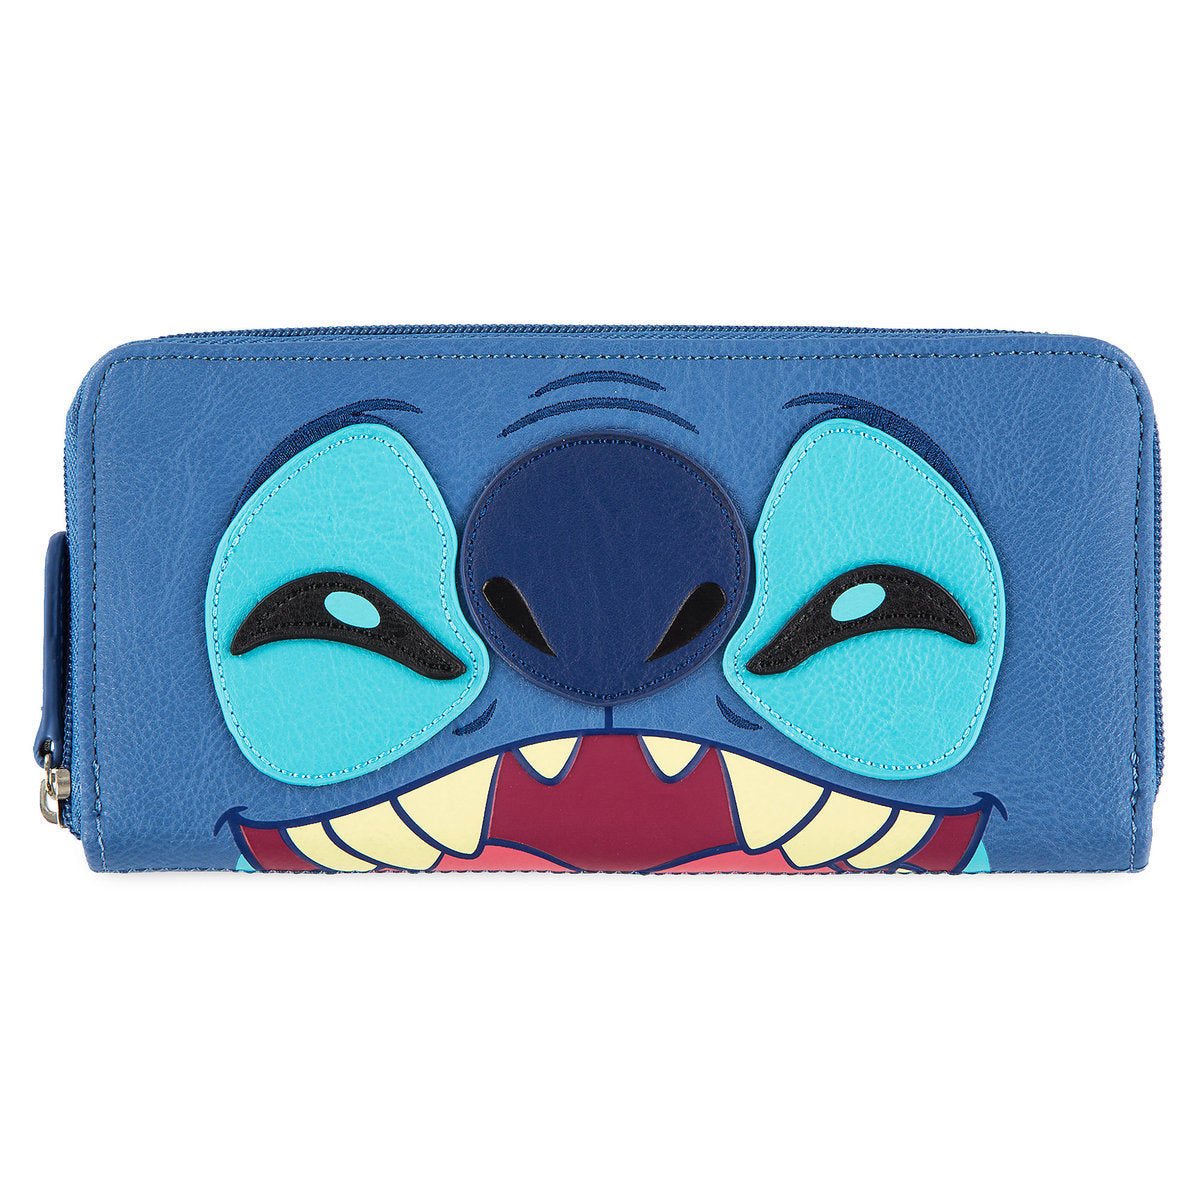 Disney Parks Stitch Zip-Around Wallet by Loungefly New with Tags